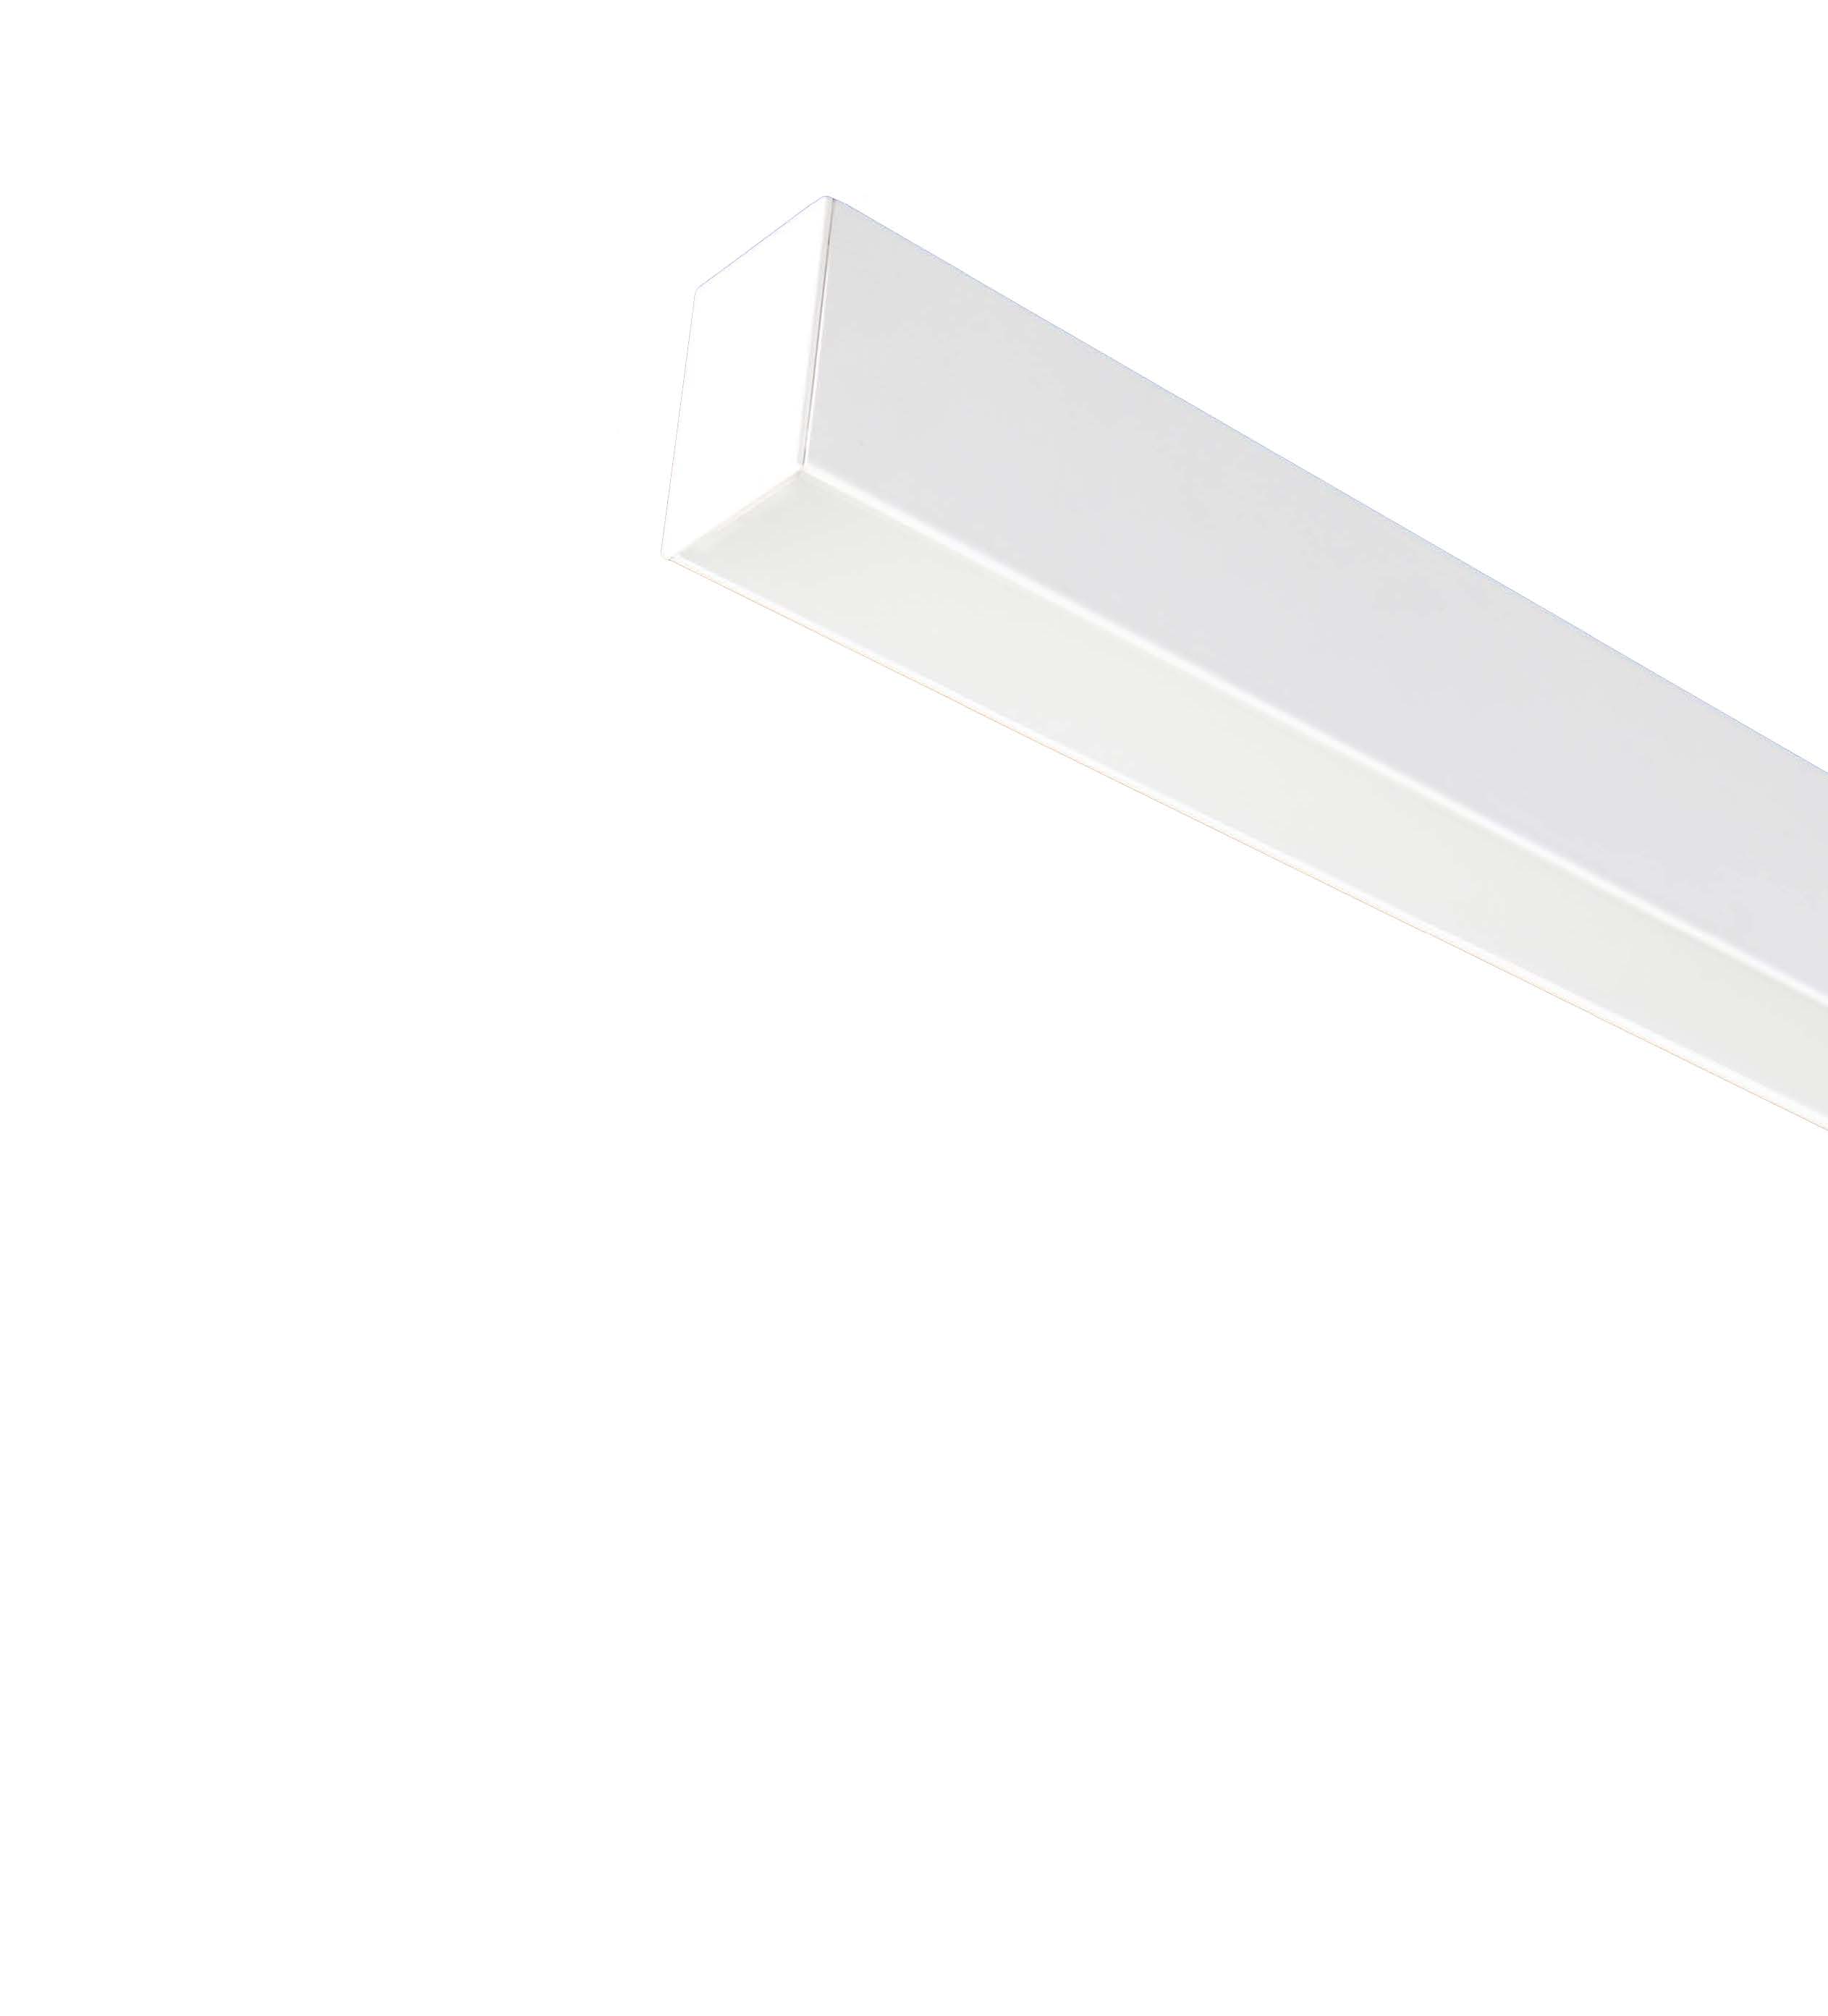 2.5” x 3.5” LED Recessed Mount Linear Fixture